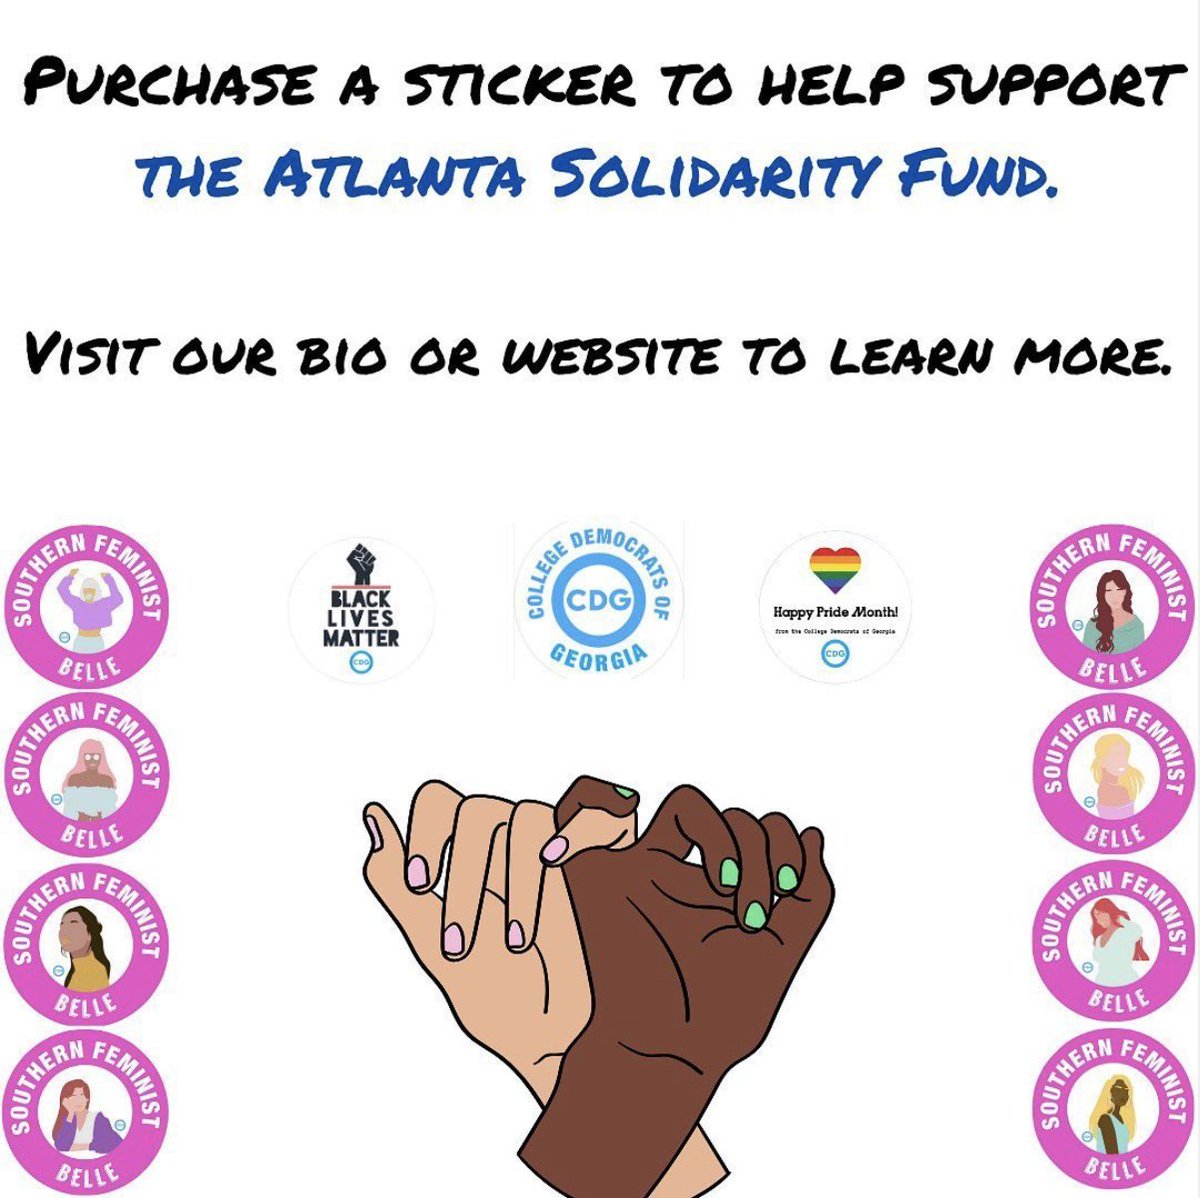 Purchase a sticker today to support the Atlanta Solidarity Fund! secure.actblue.com/donate/cdgstic…